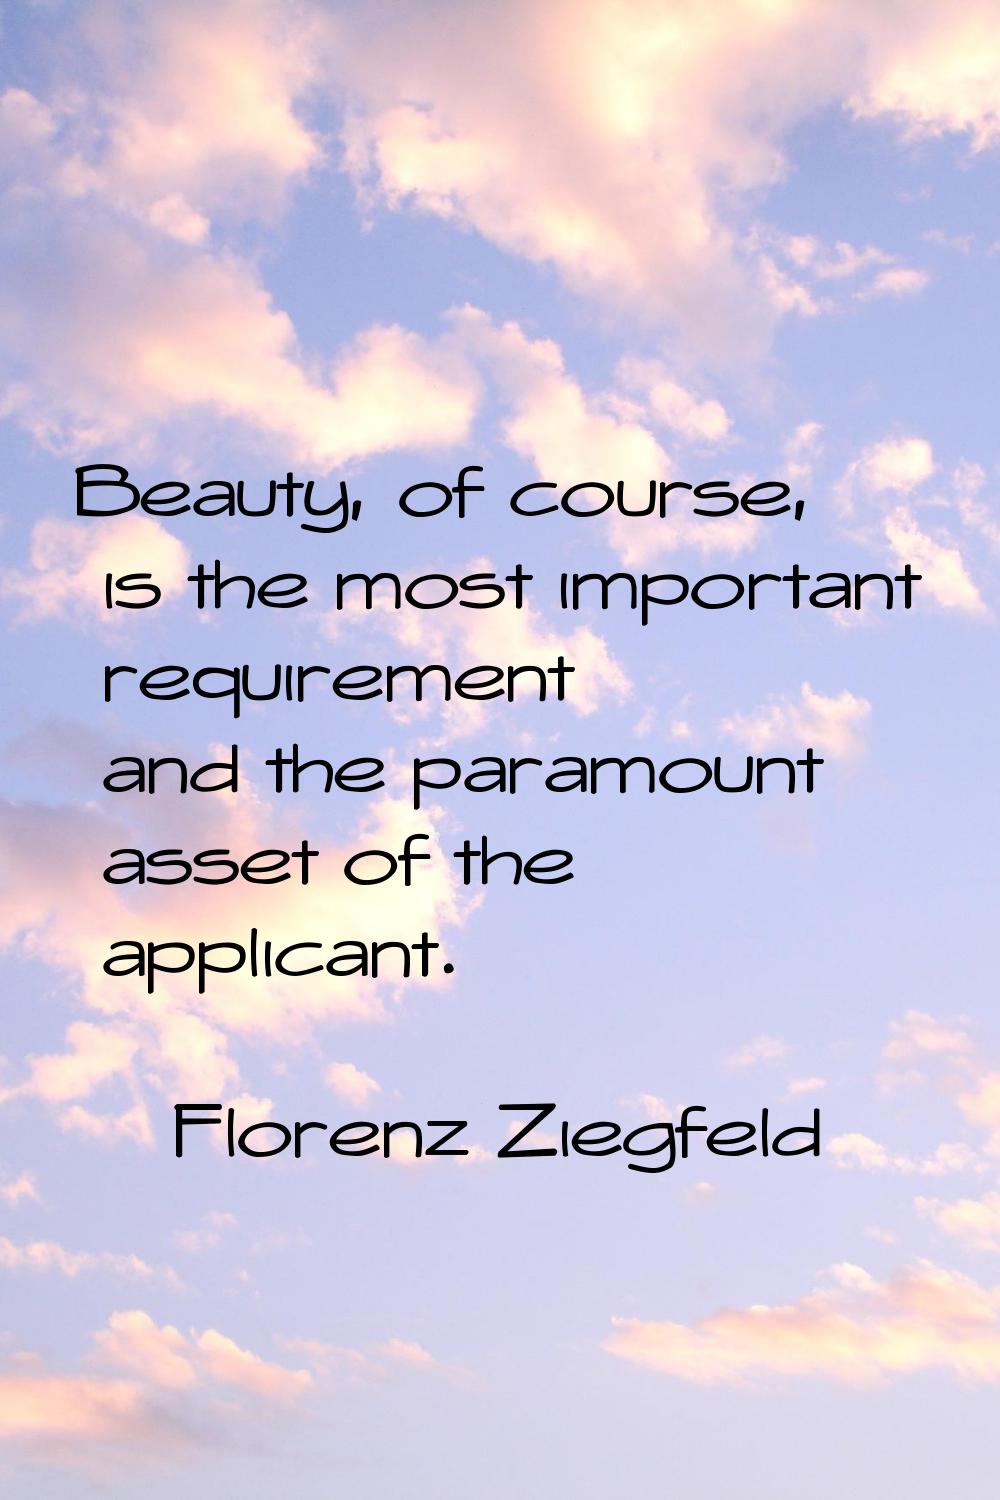 Beauty, of course, is the most important requirement and the paramount asset of the applicant.